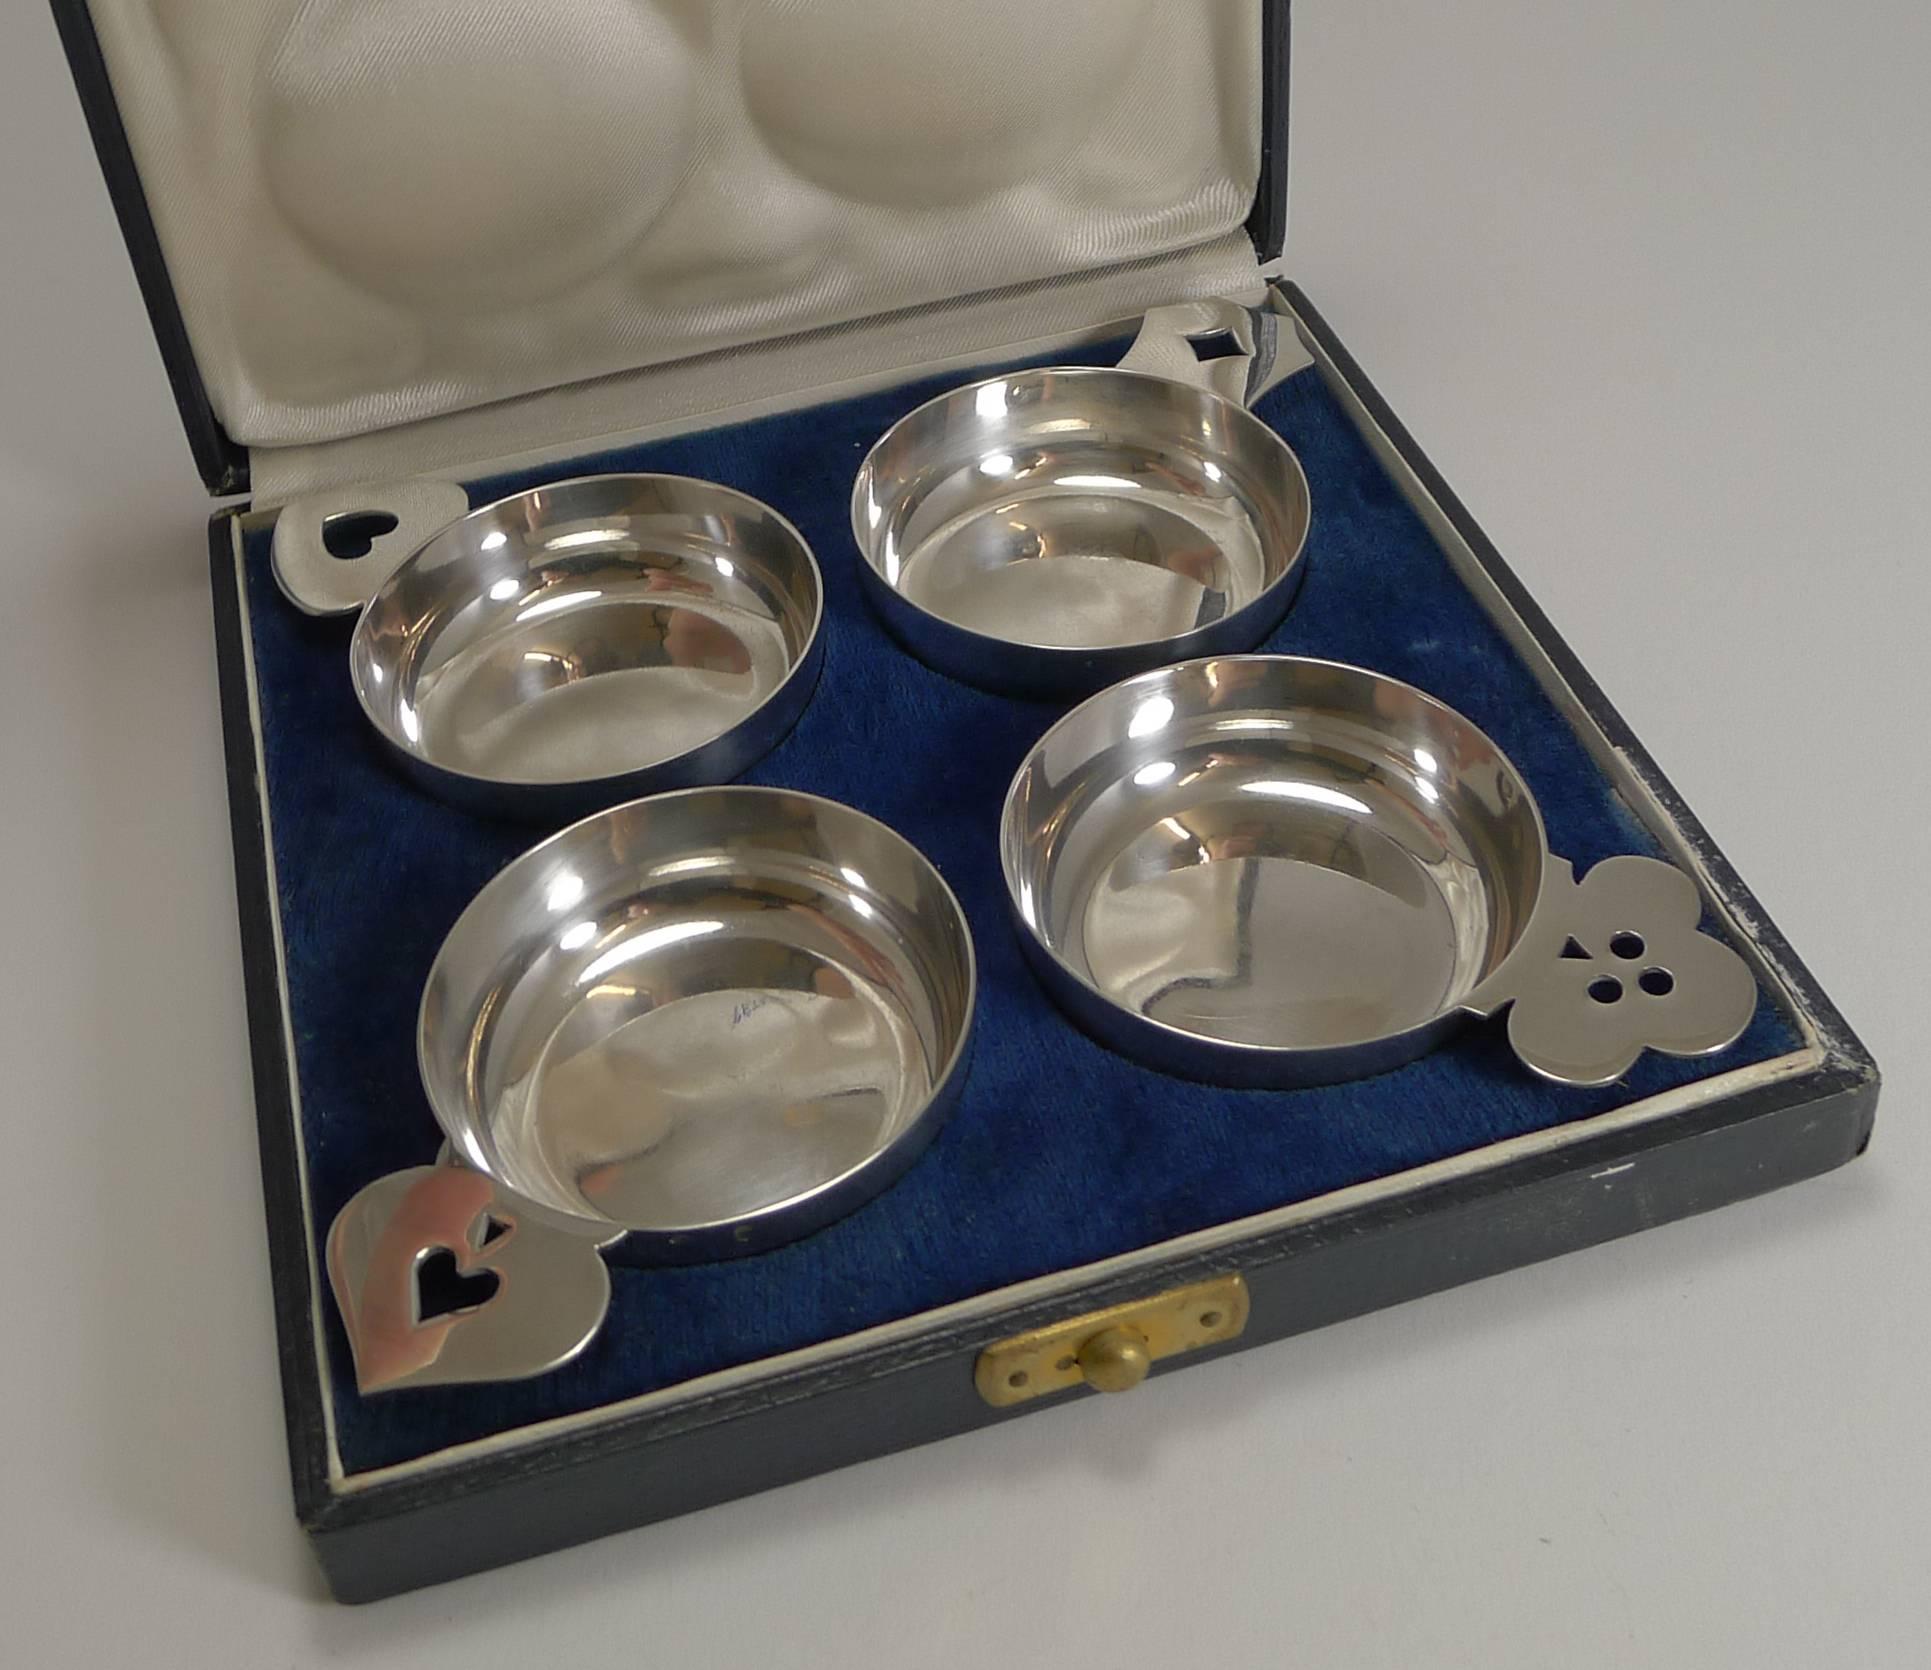 A charming set of four Art Deco French sterling silver wine tasters, all in superb condition each with a novelty shaped and pierced handle, all with a different playing card suite motif.

They come in their original presentation box, the lining of